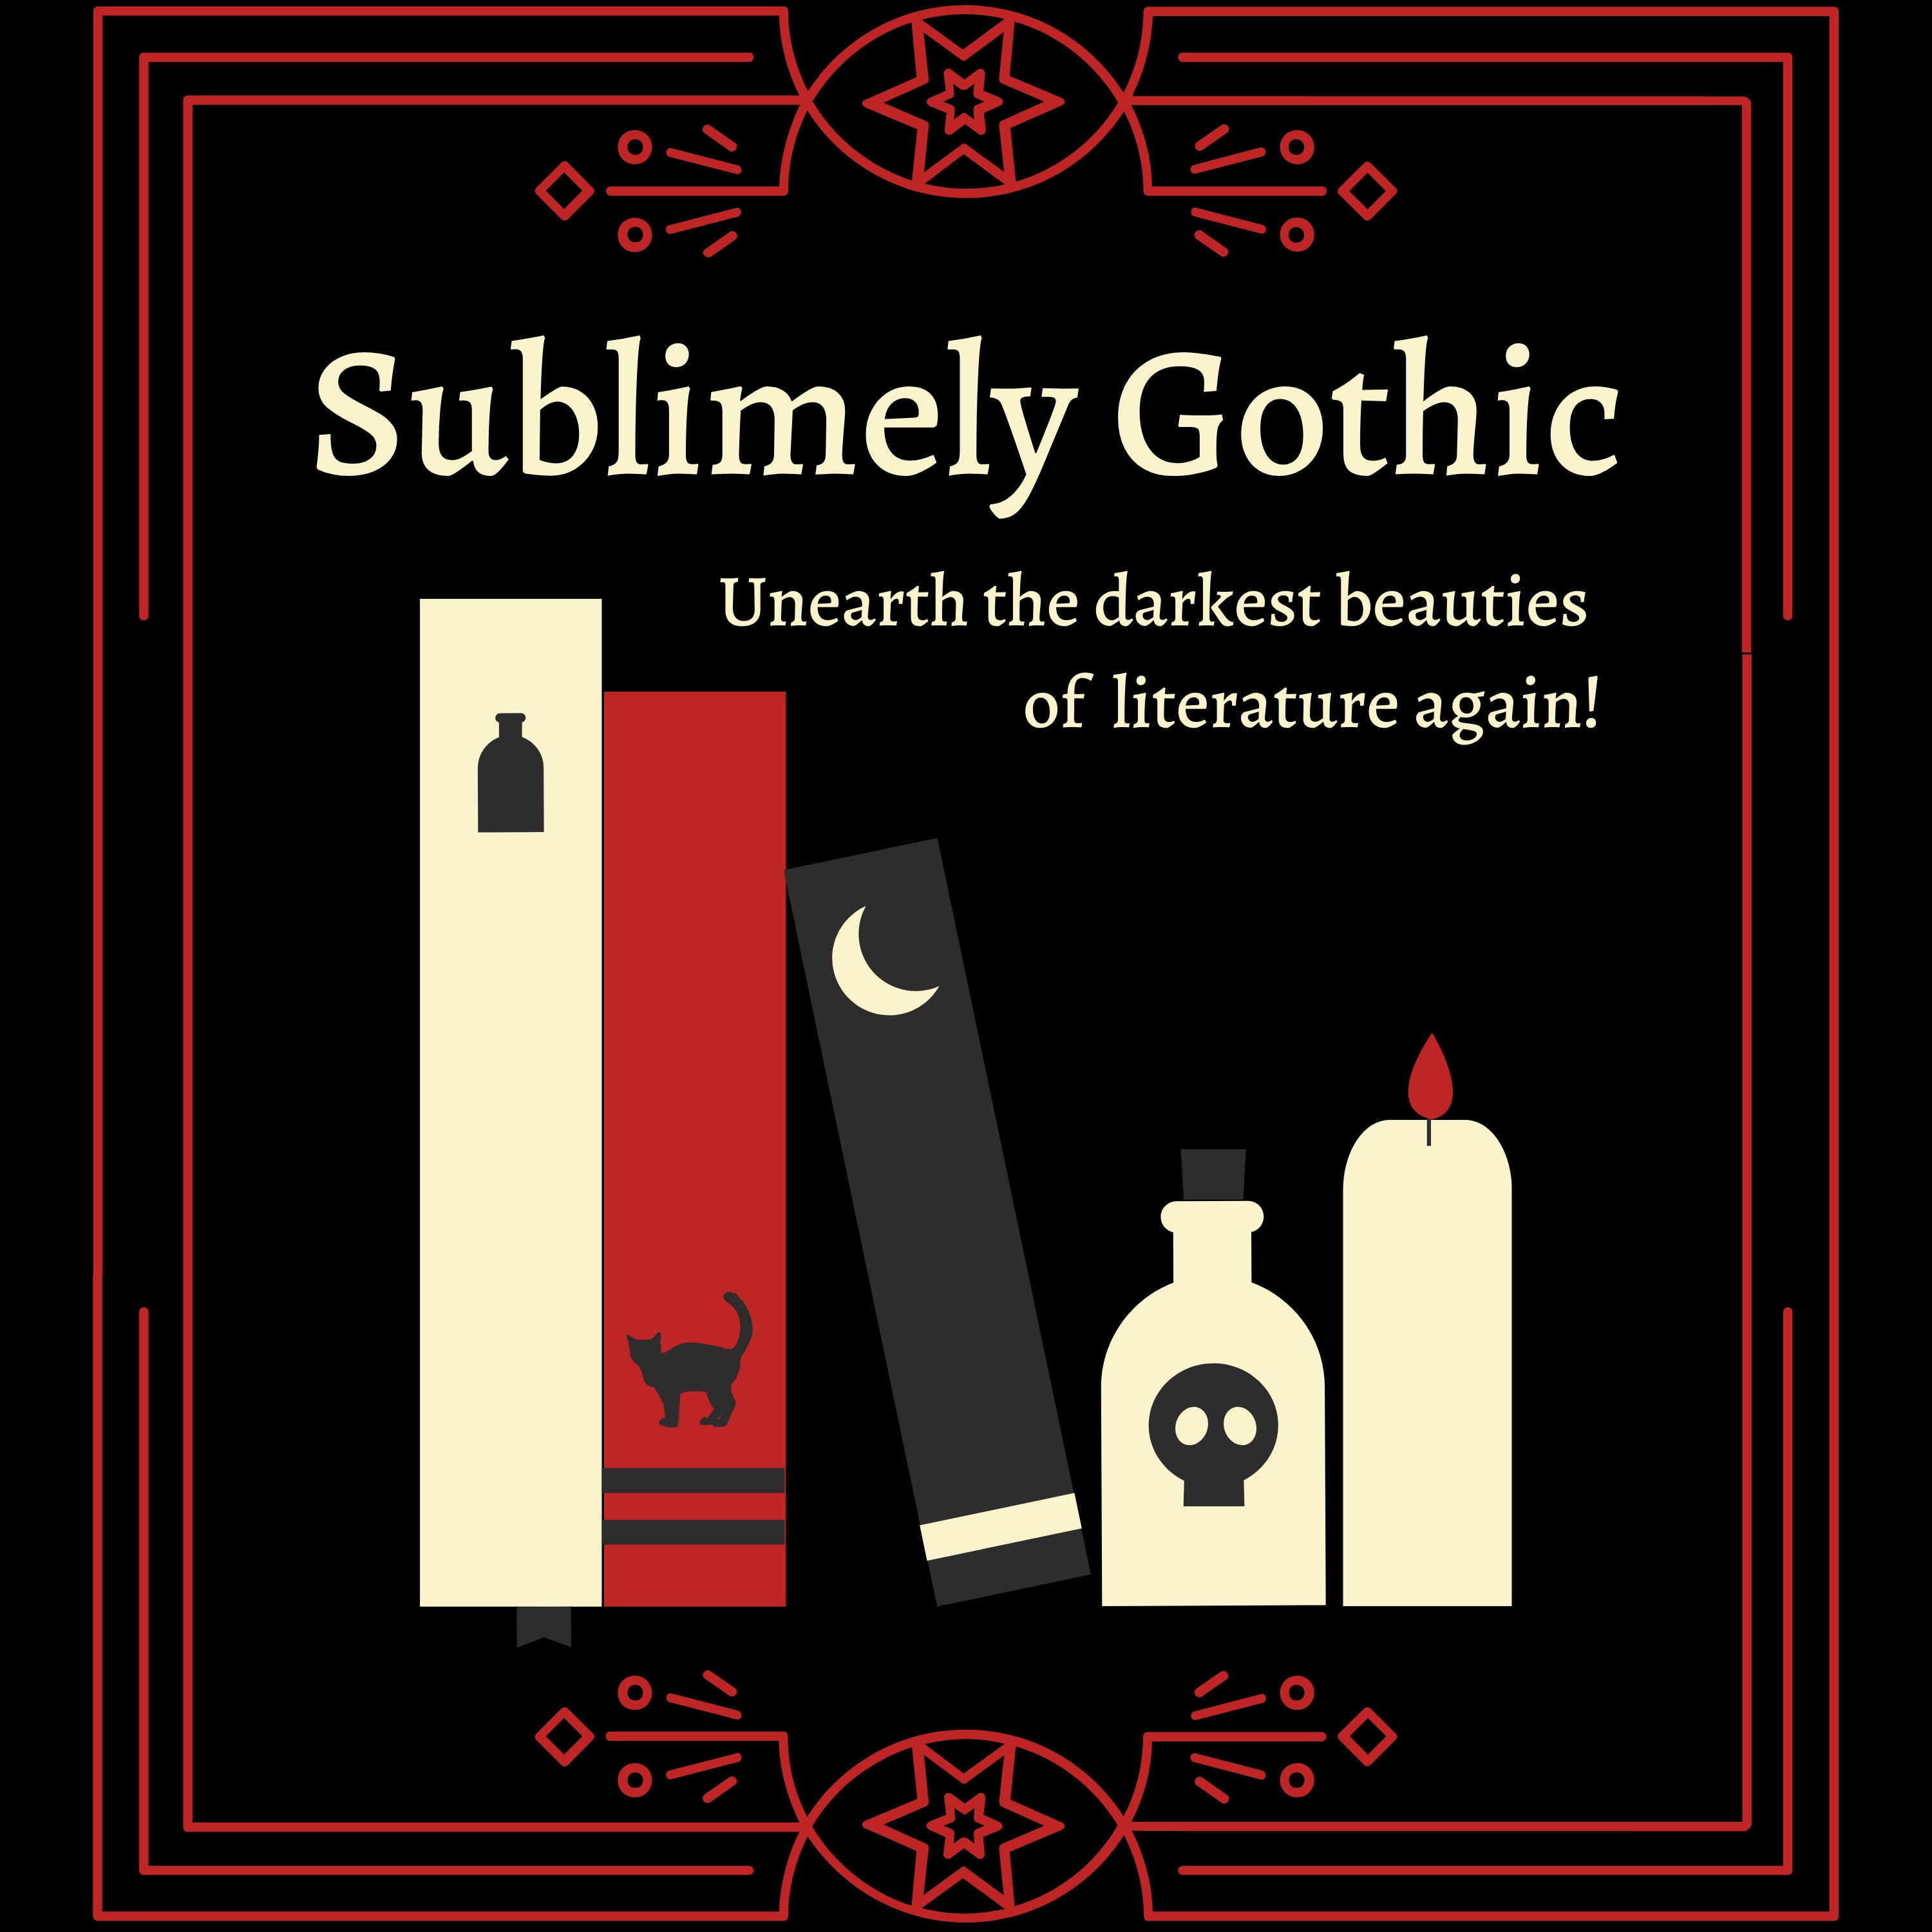 Sublimely Gothic: The Quickening